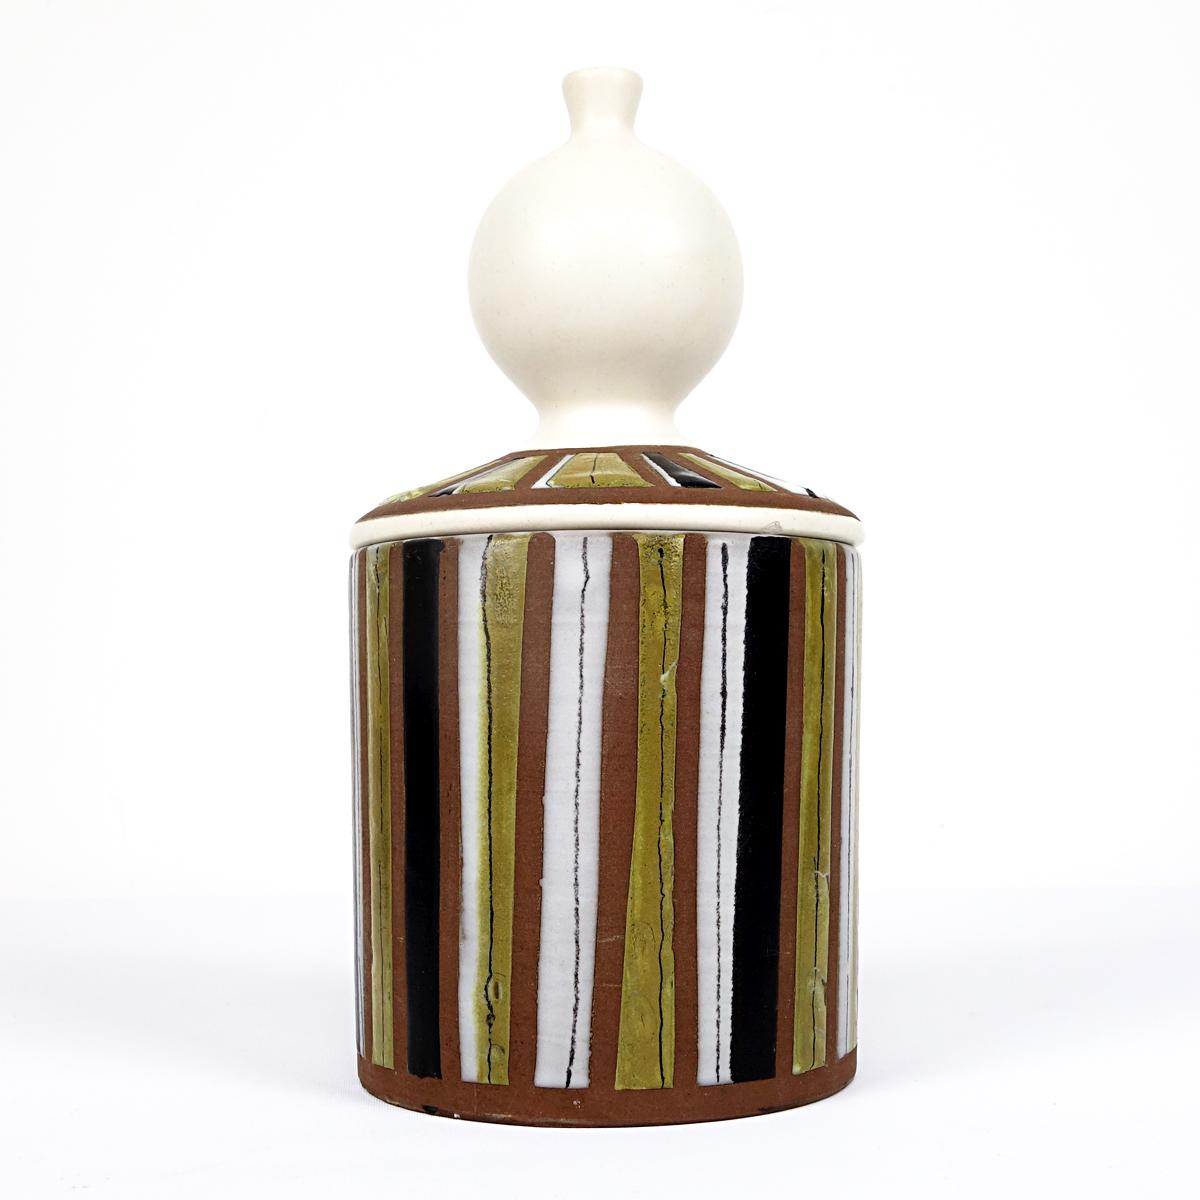 French Mid-Century Modern Ceramic Jar with Lid by Roger Capron for Vallauris